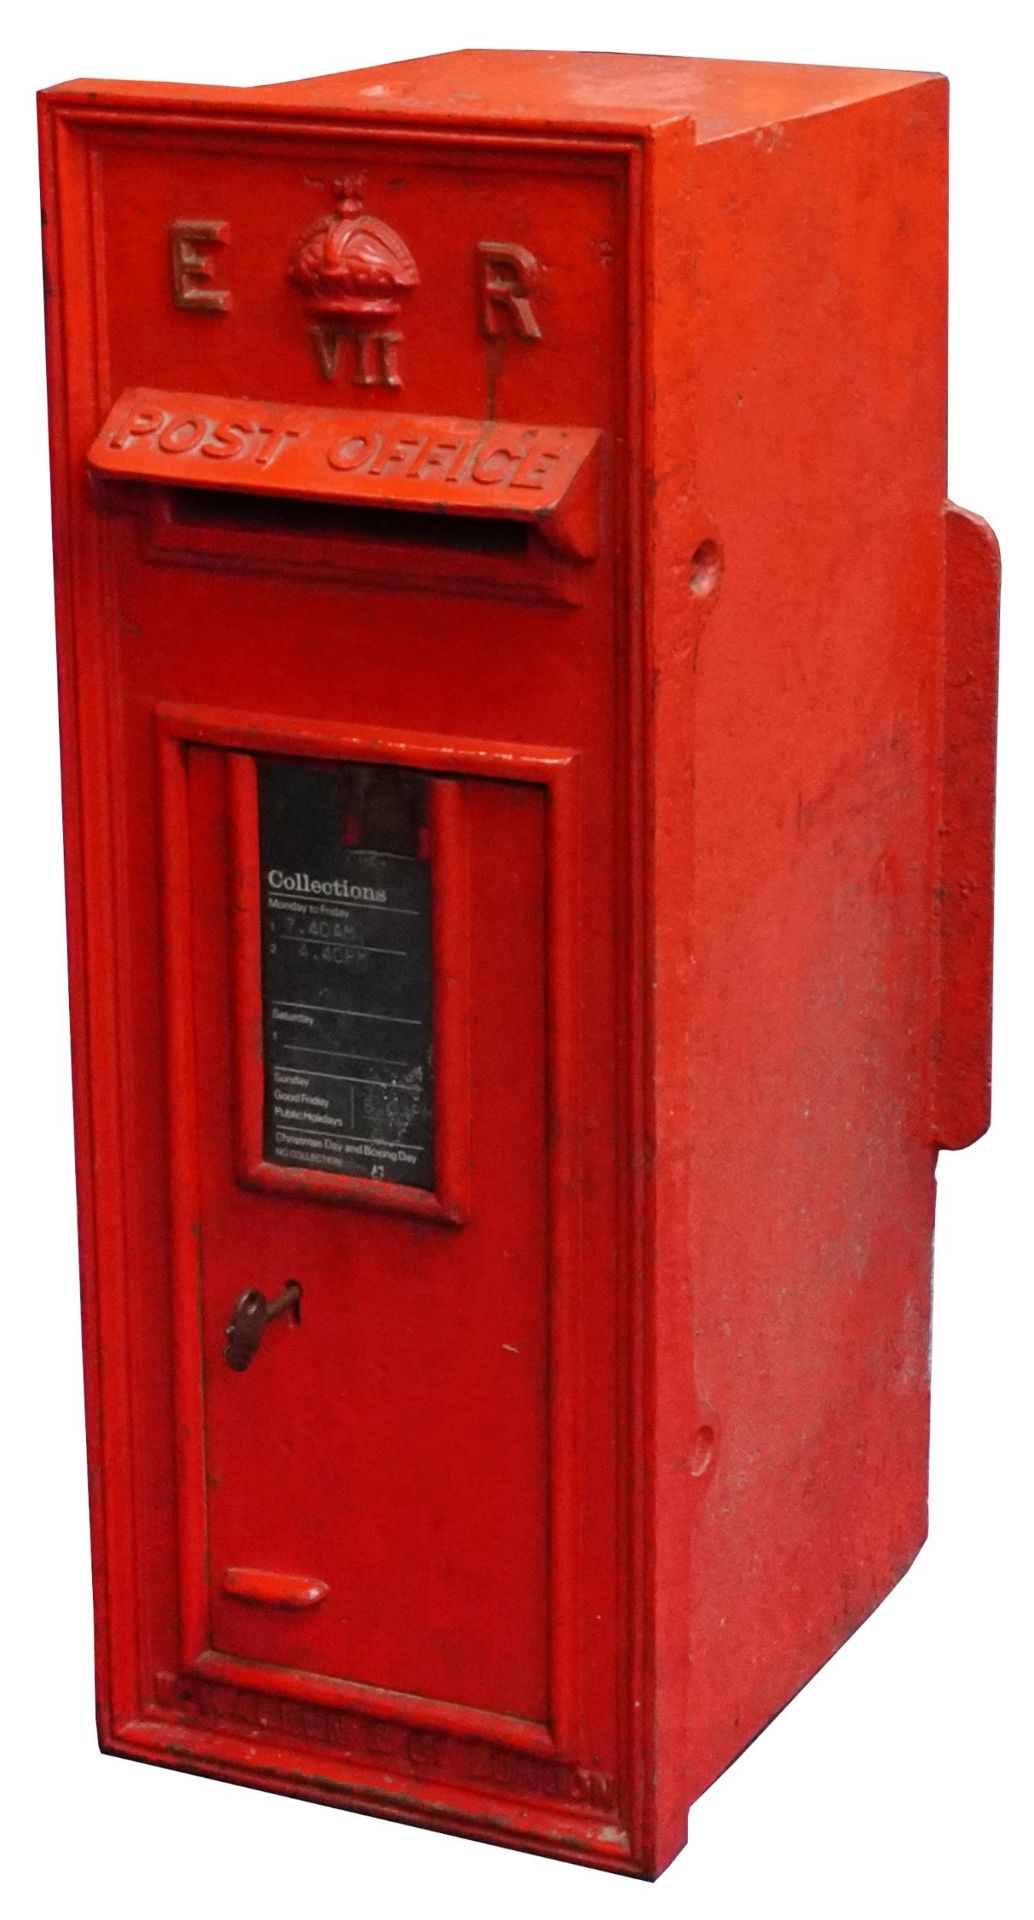 Edward VII red painted cast iron Post Office box, 72cm high